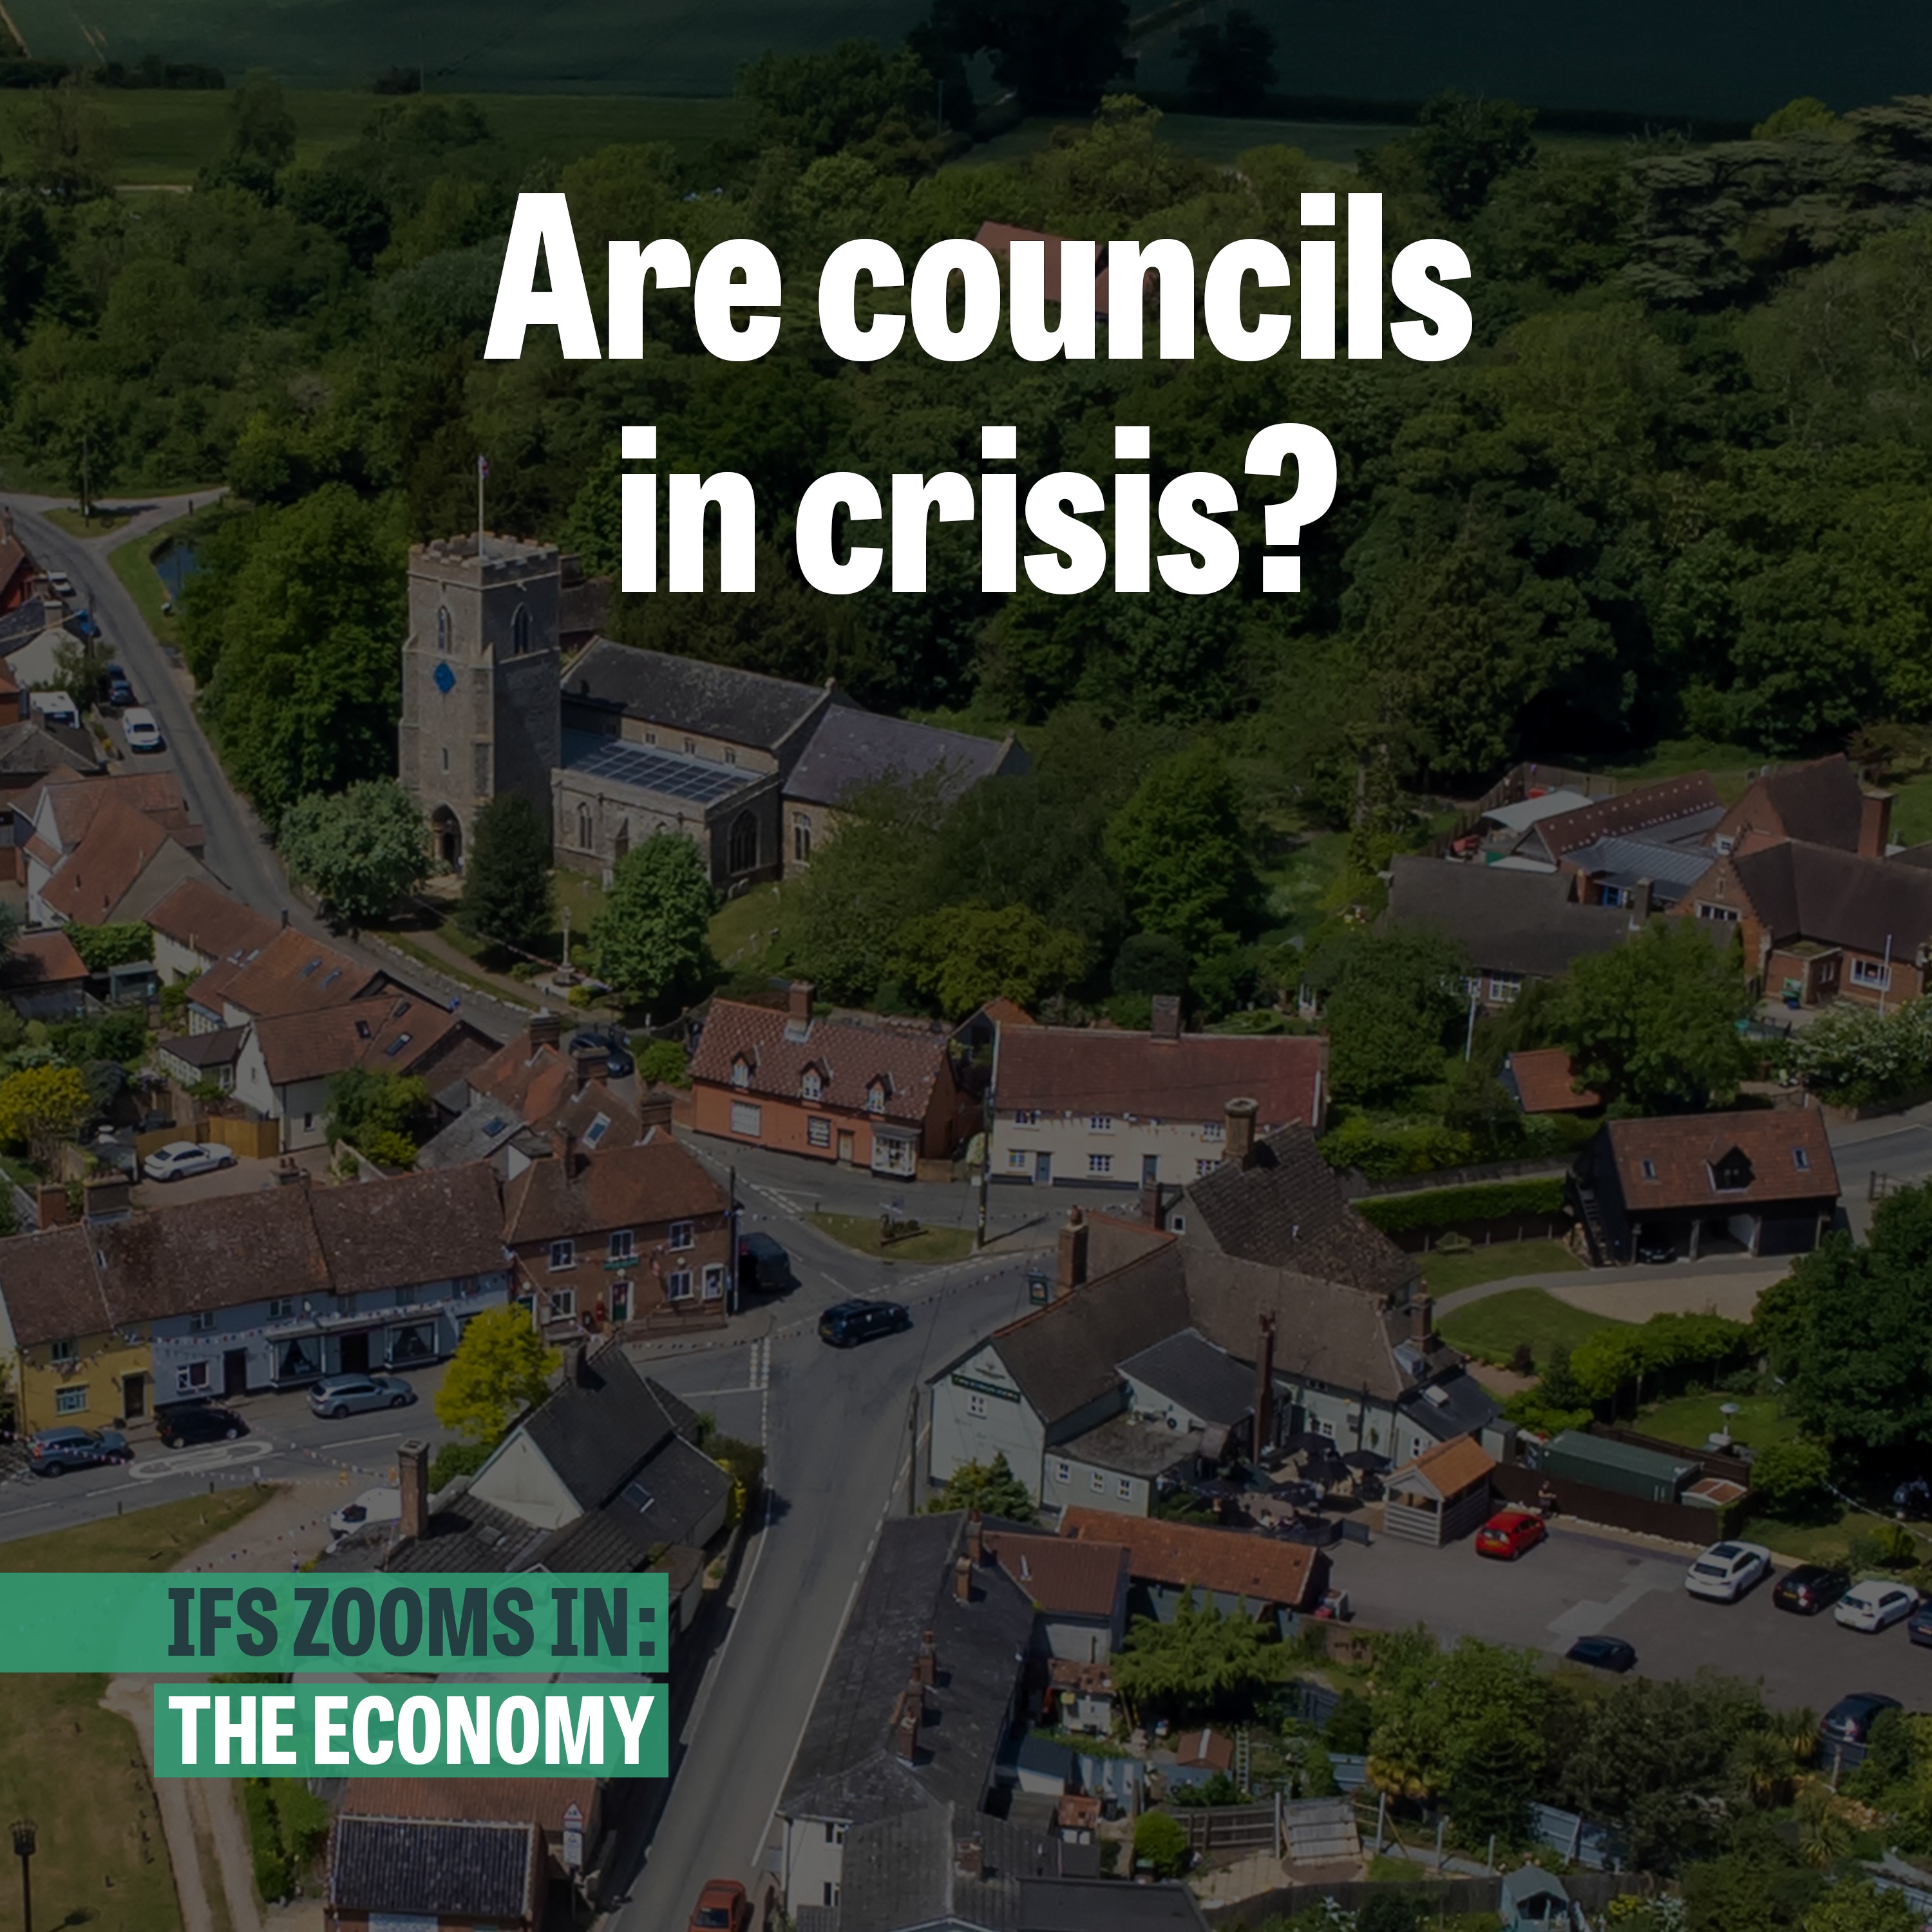 Are councils in crisis?